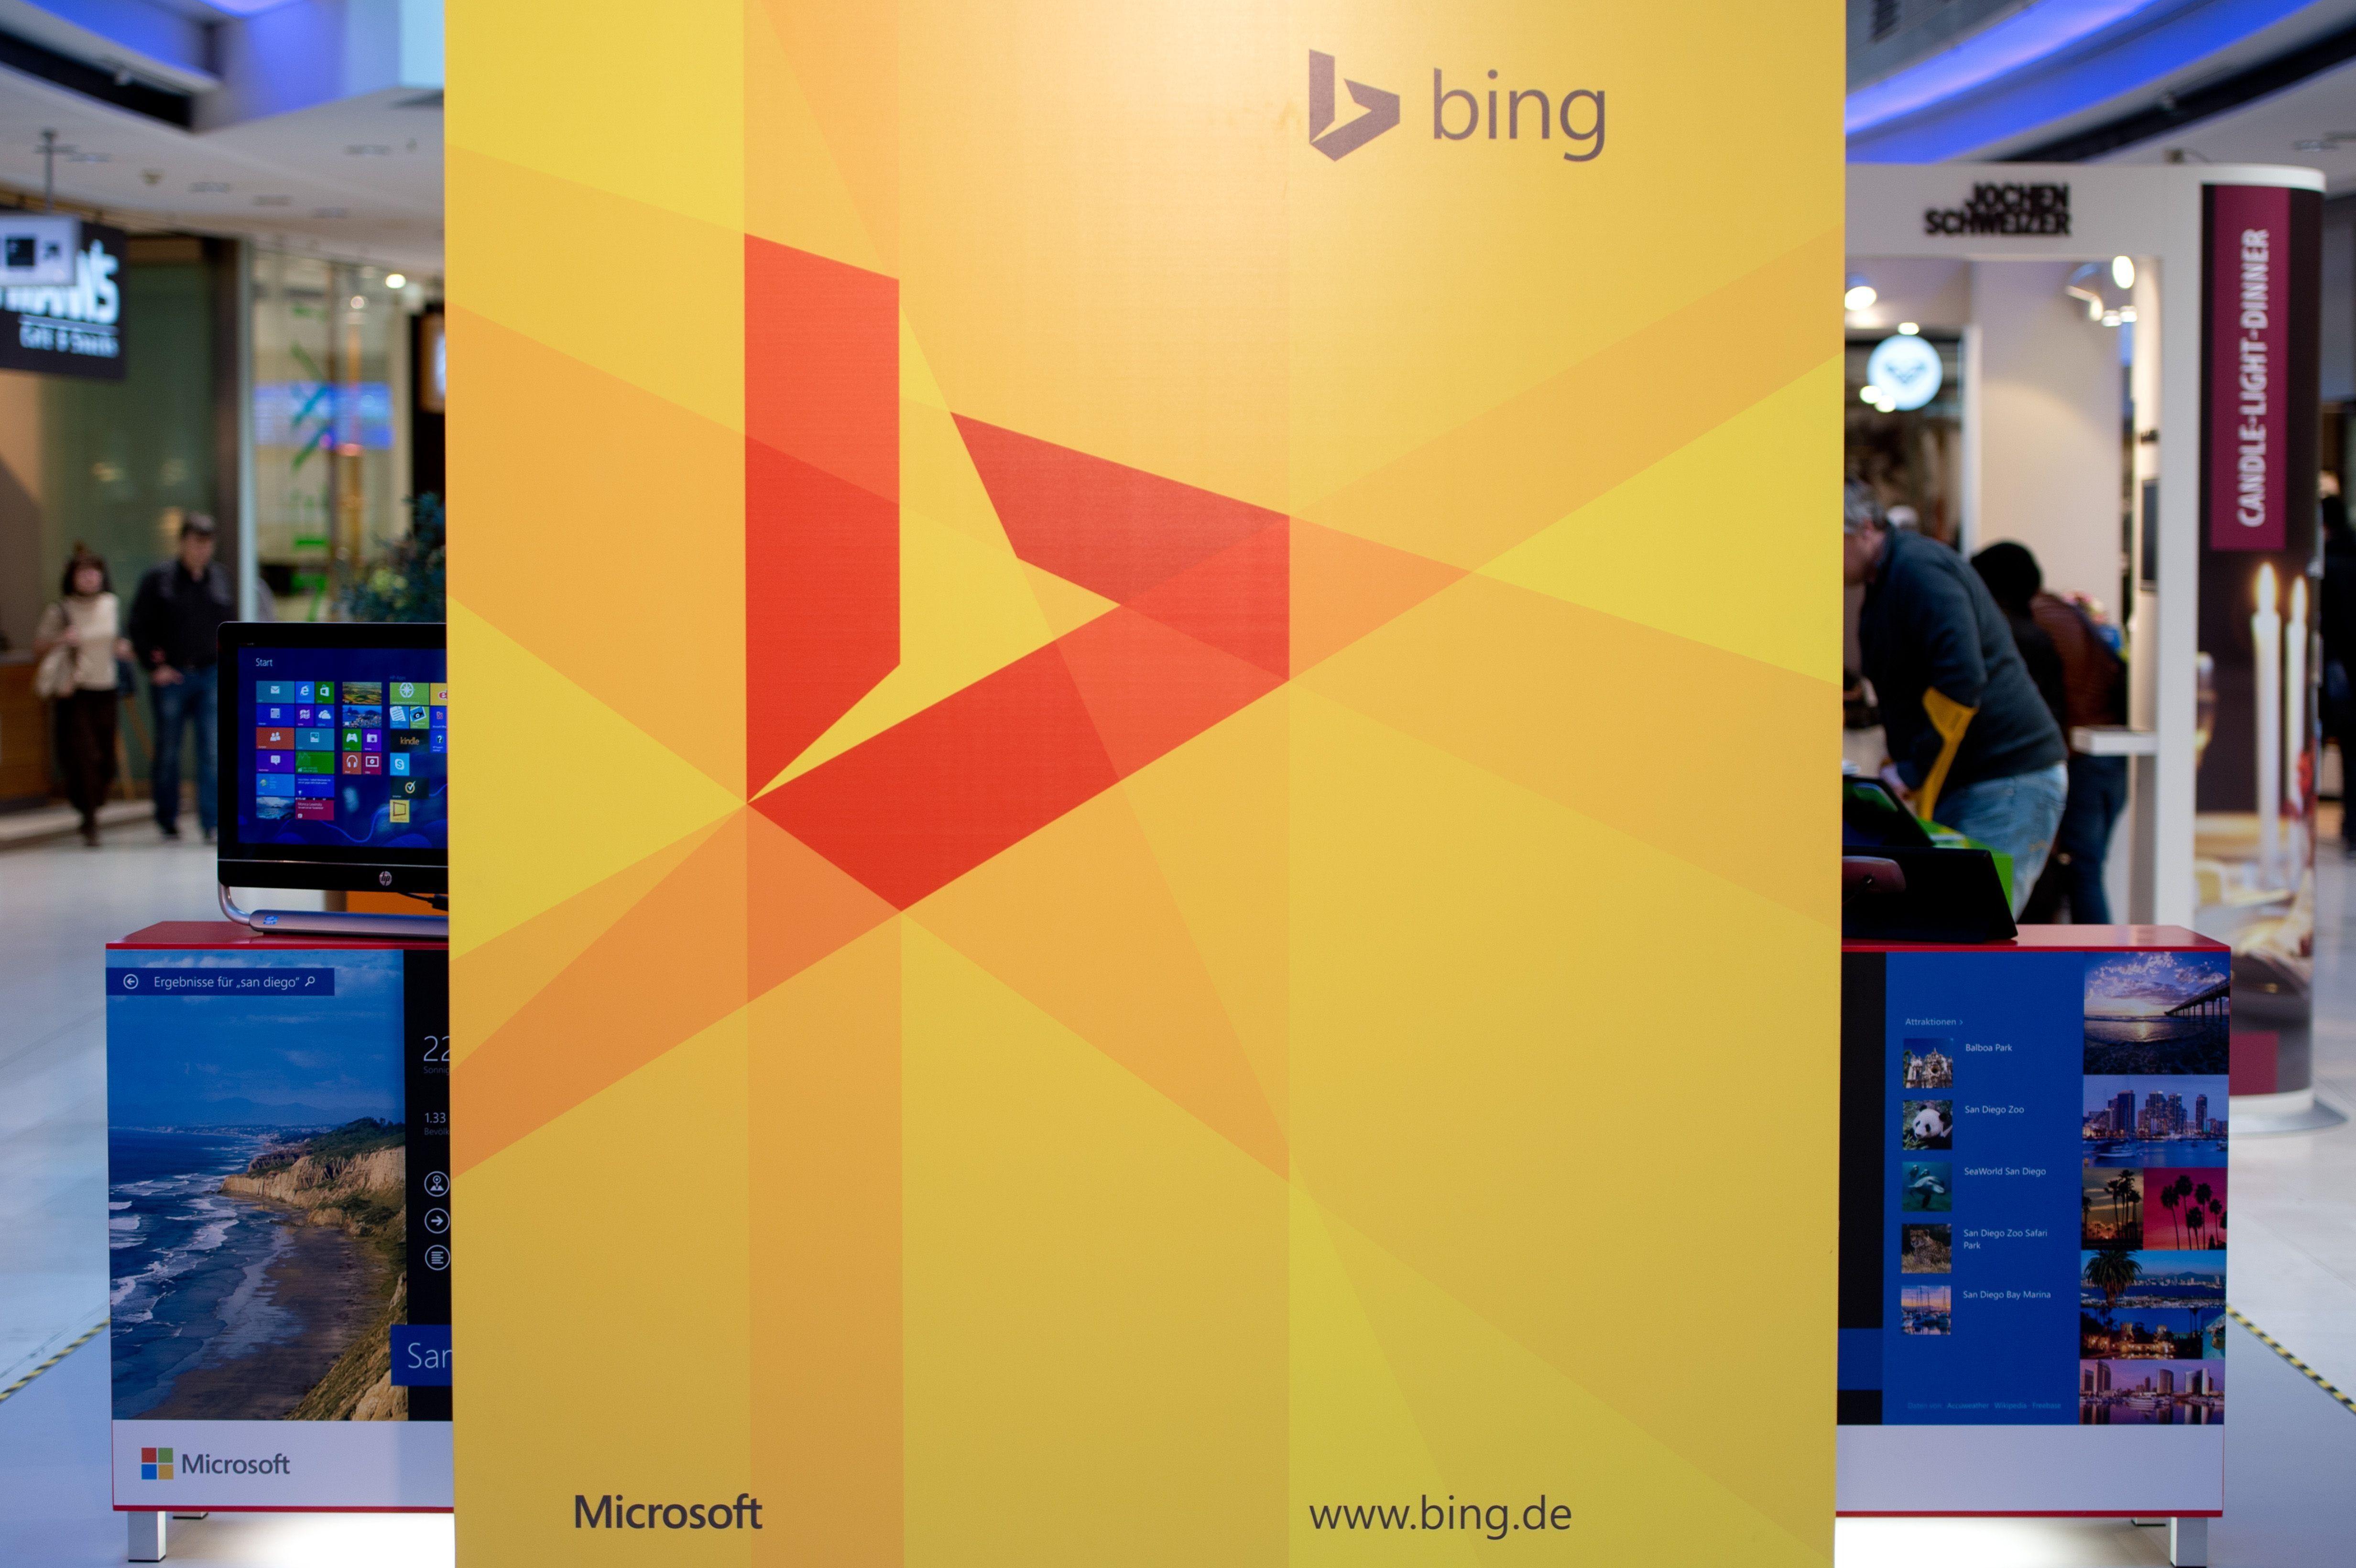 Bing Product Search Logo - Microsoft's Bing Search Engine Is Finally Proiftable